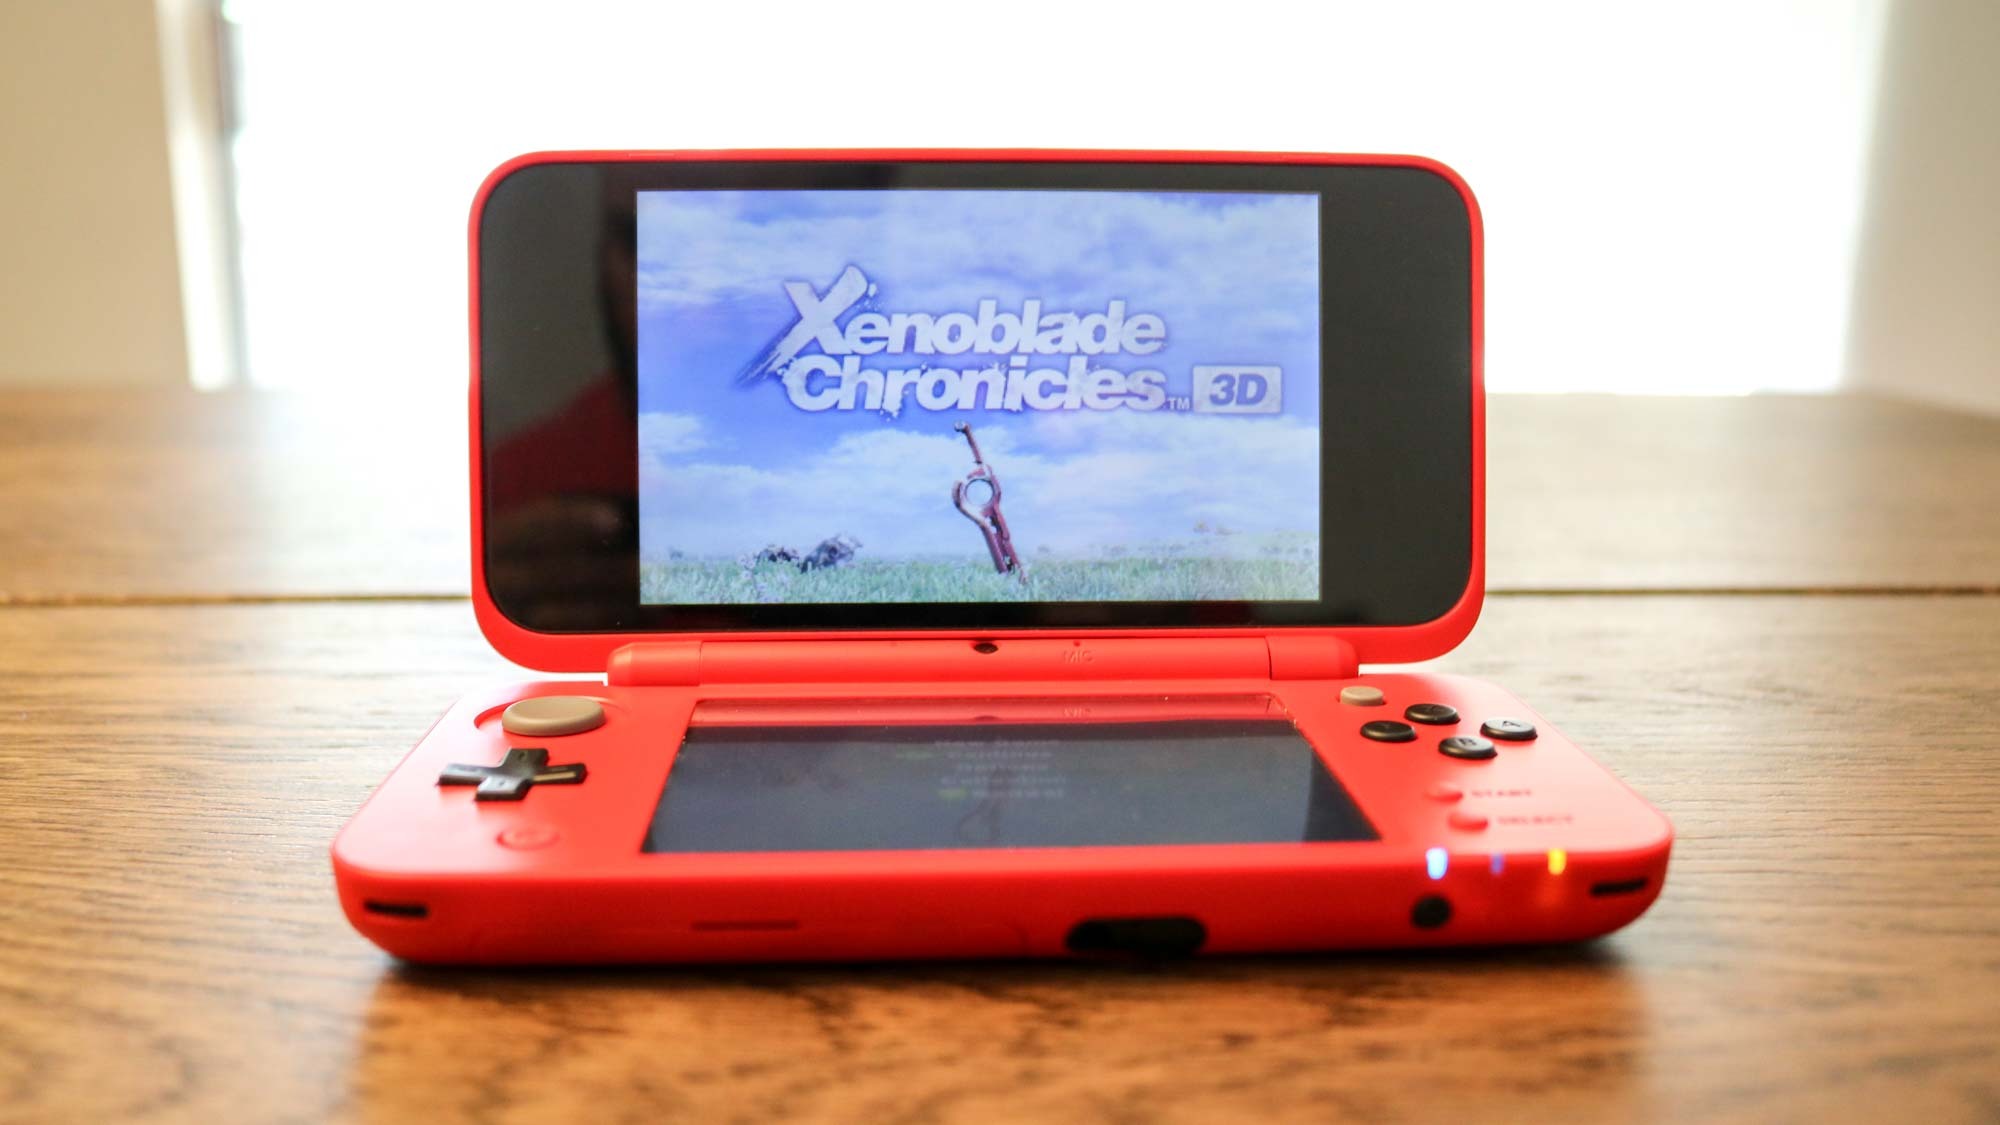 Xenoblade Chronicles 3D on a 2DS XL